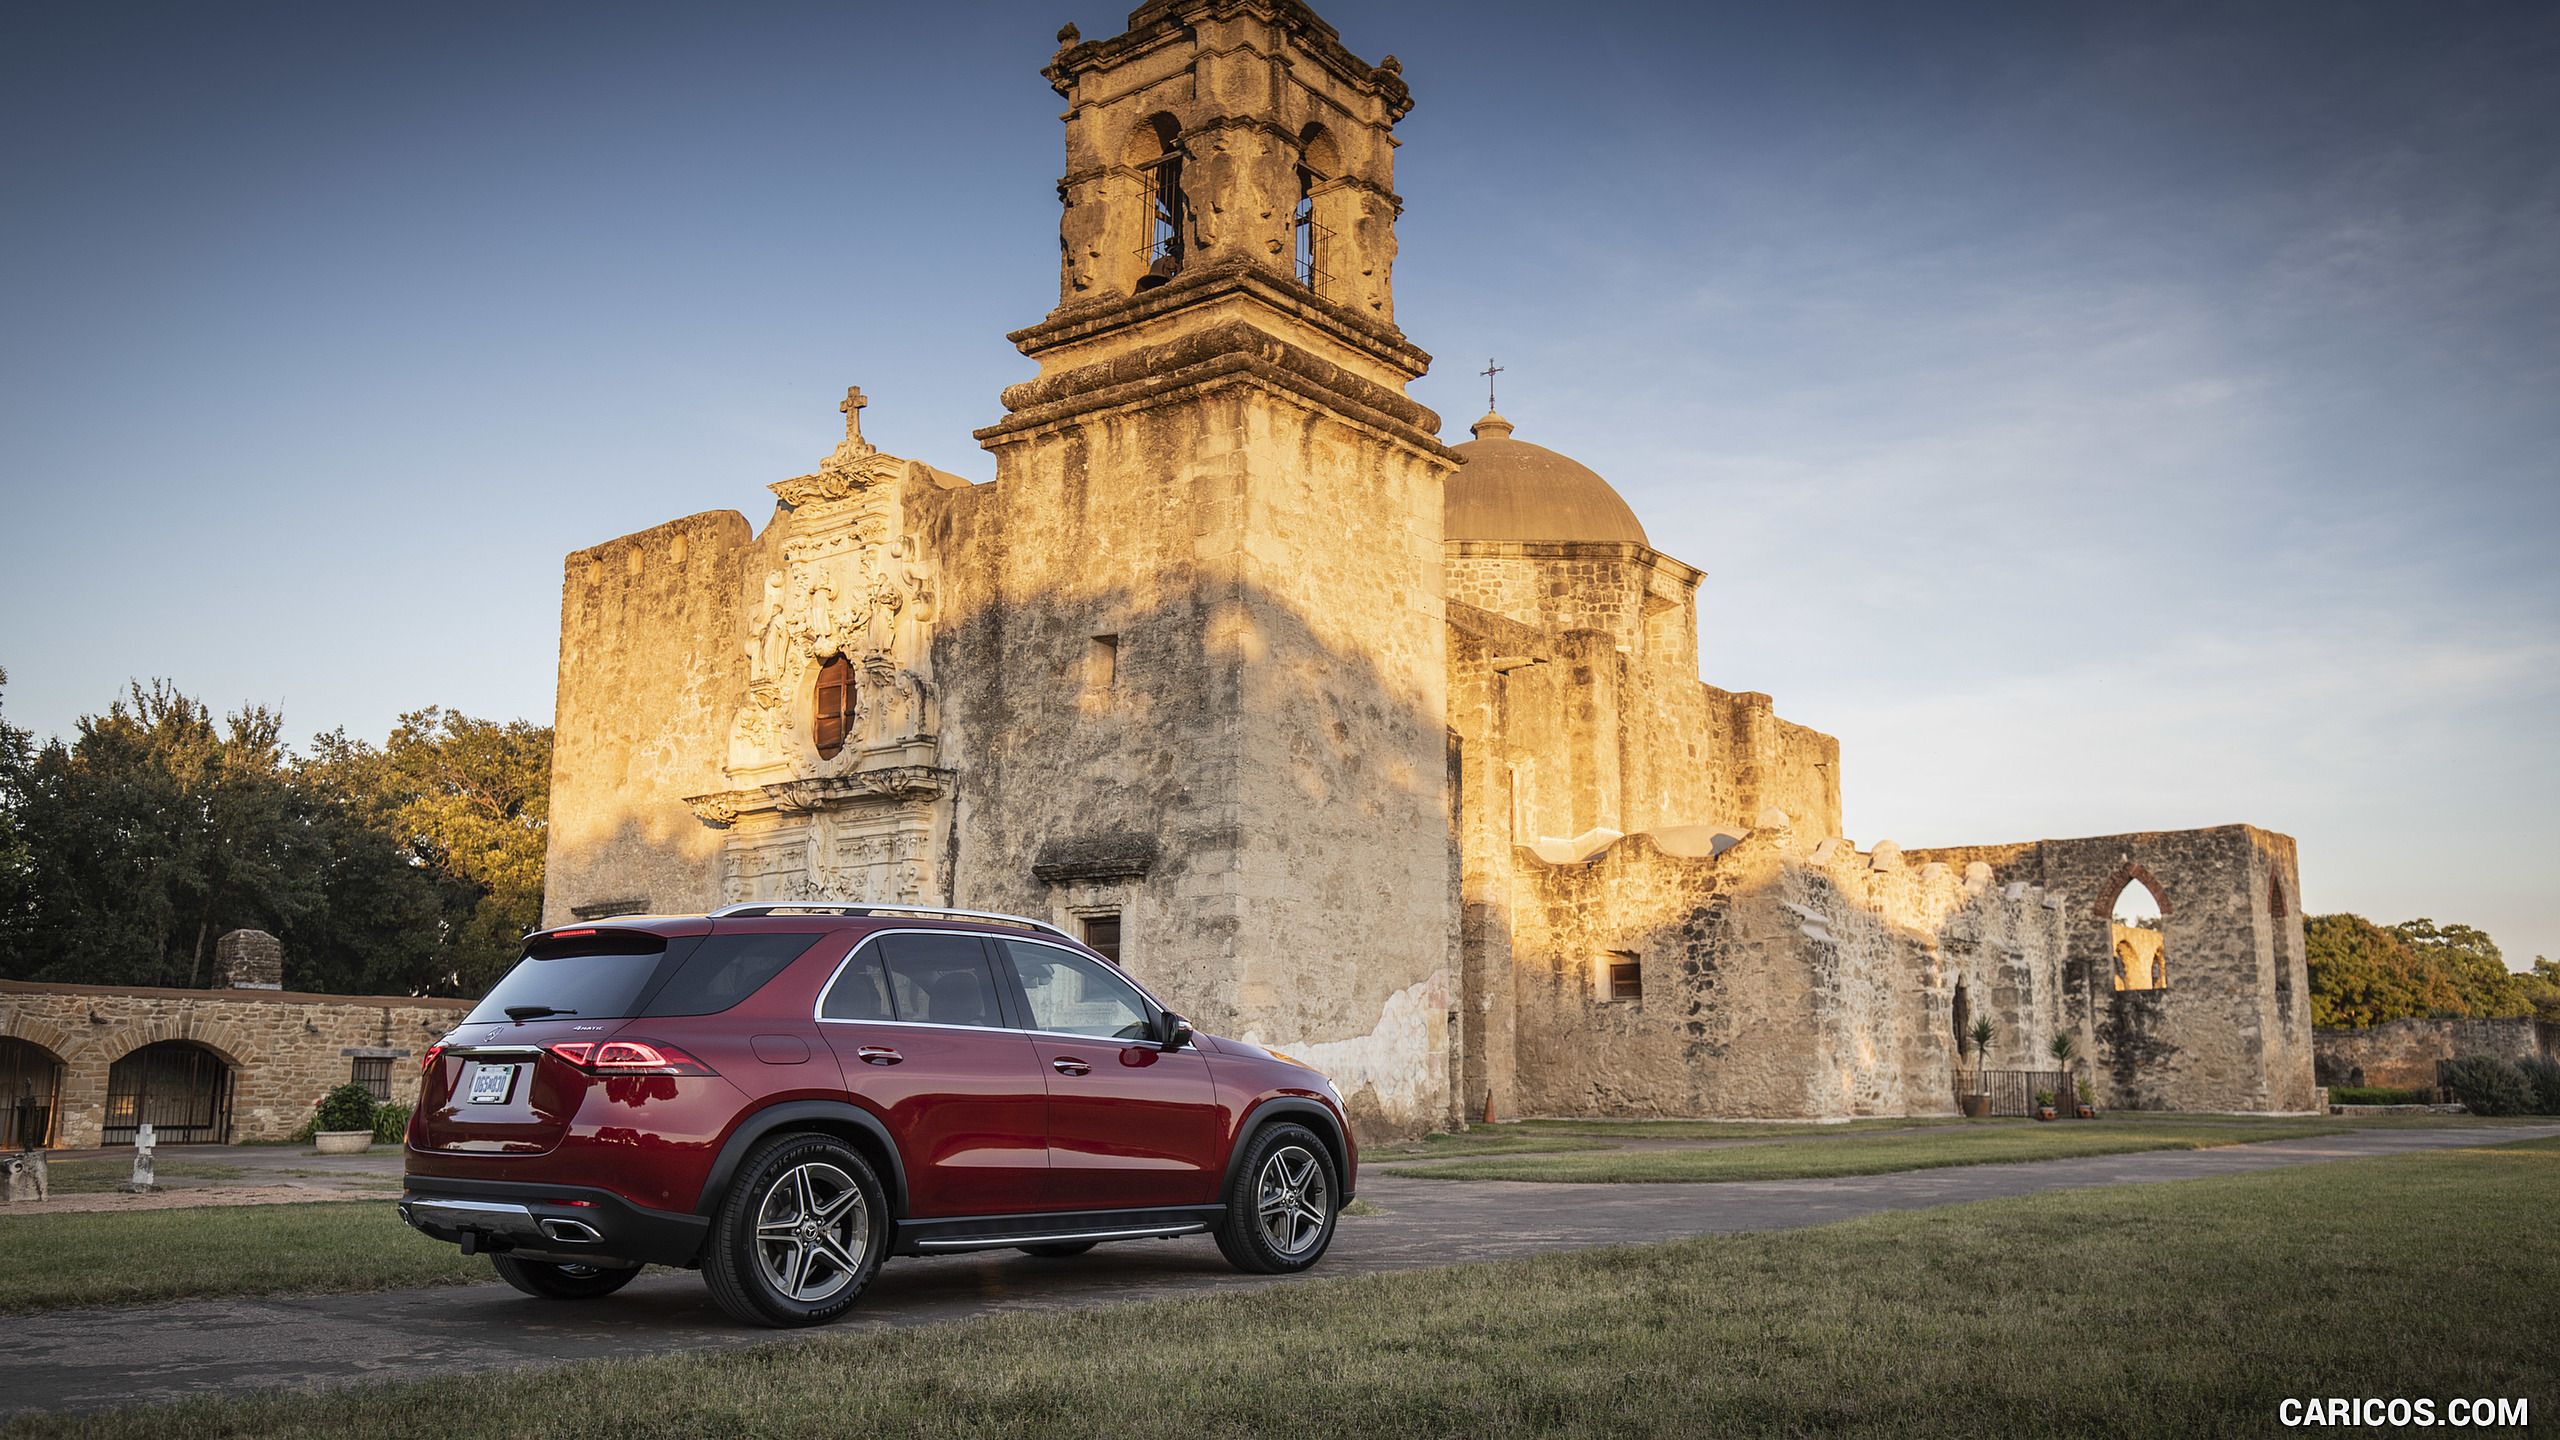 2020 Mercedes-Benz GLE 450 4MATIC (Color: Designo Hyazinth Red Metallic; US-Spec) , #307 of 358